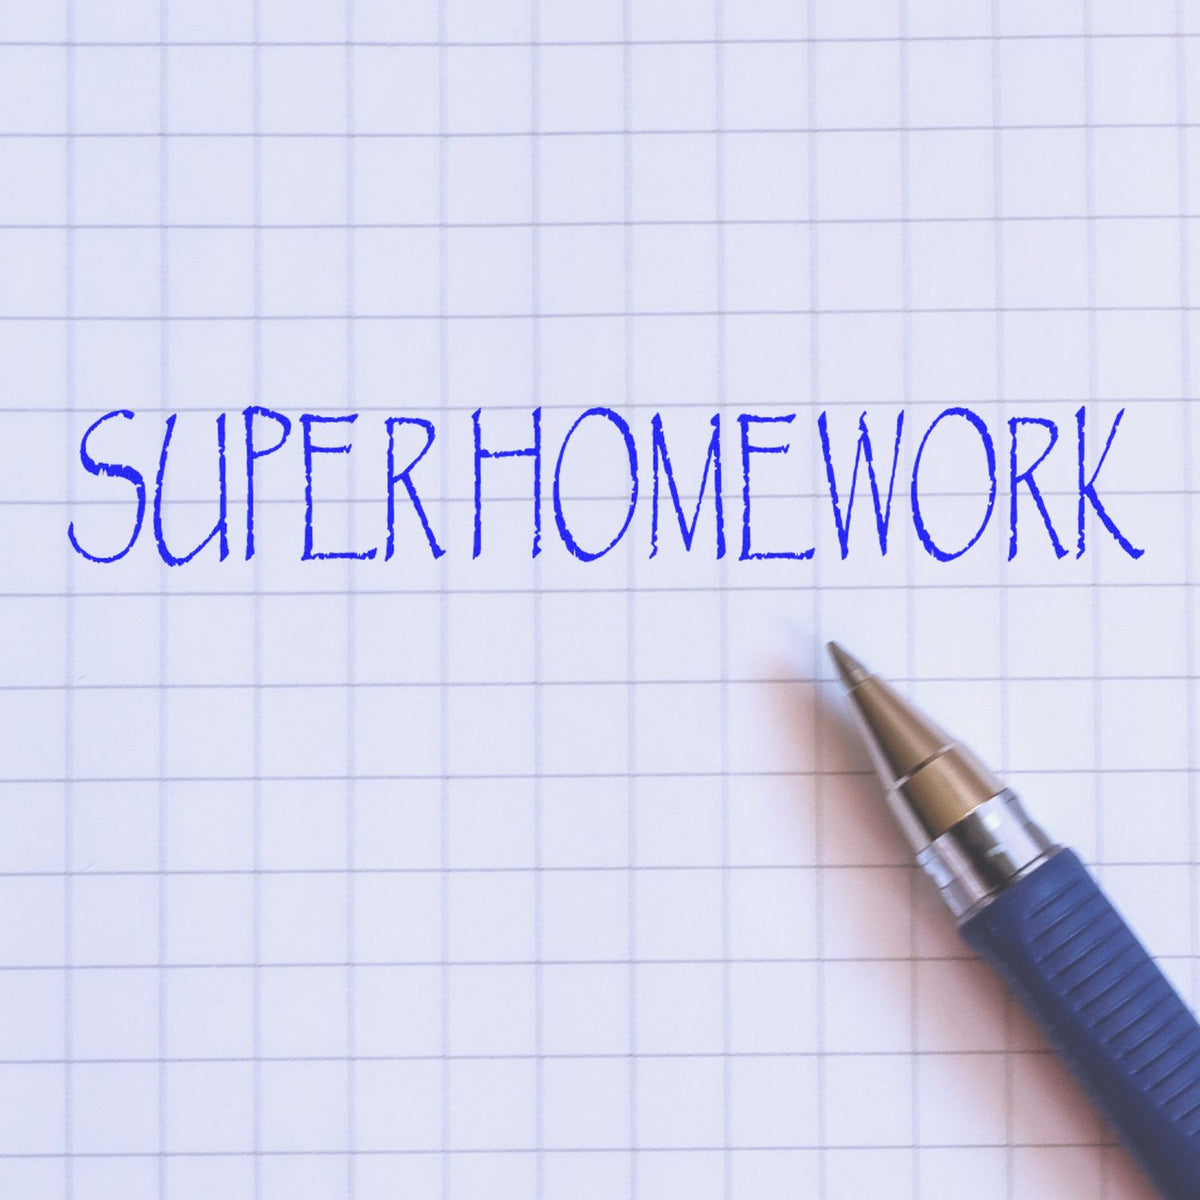 Large Super Homework Rubber Stamp In Use Photo